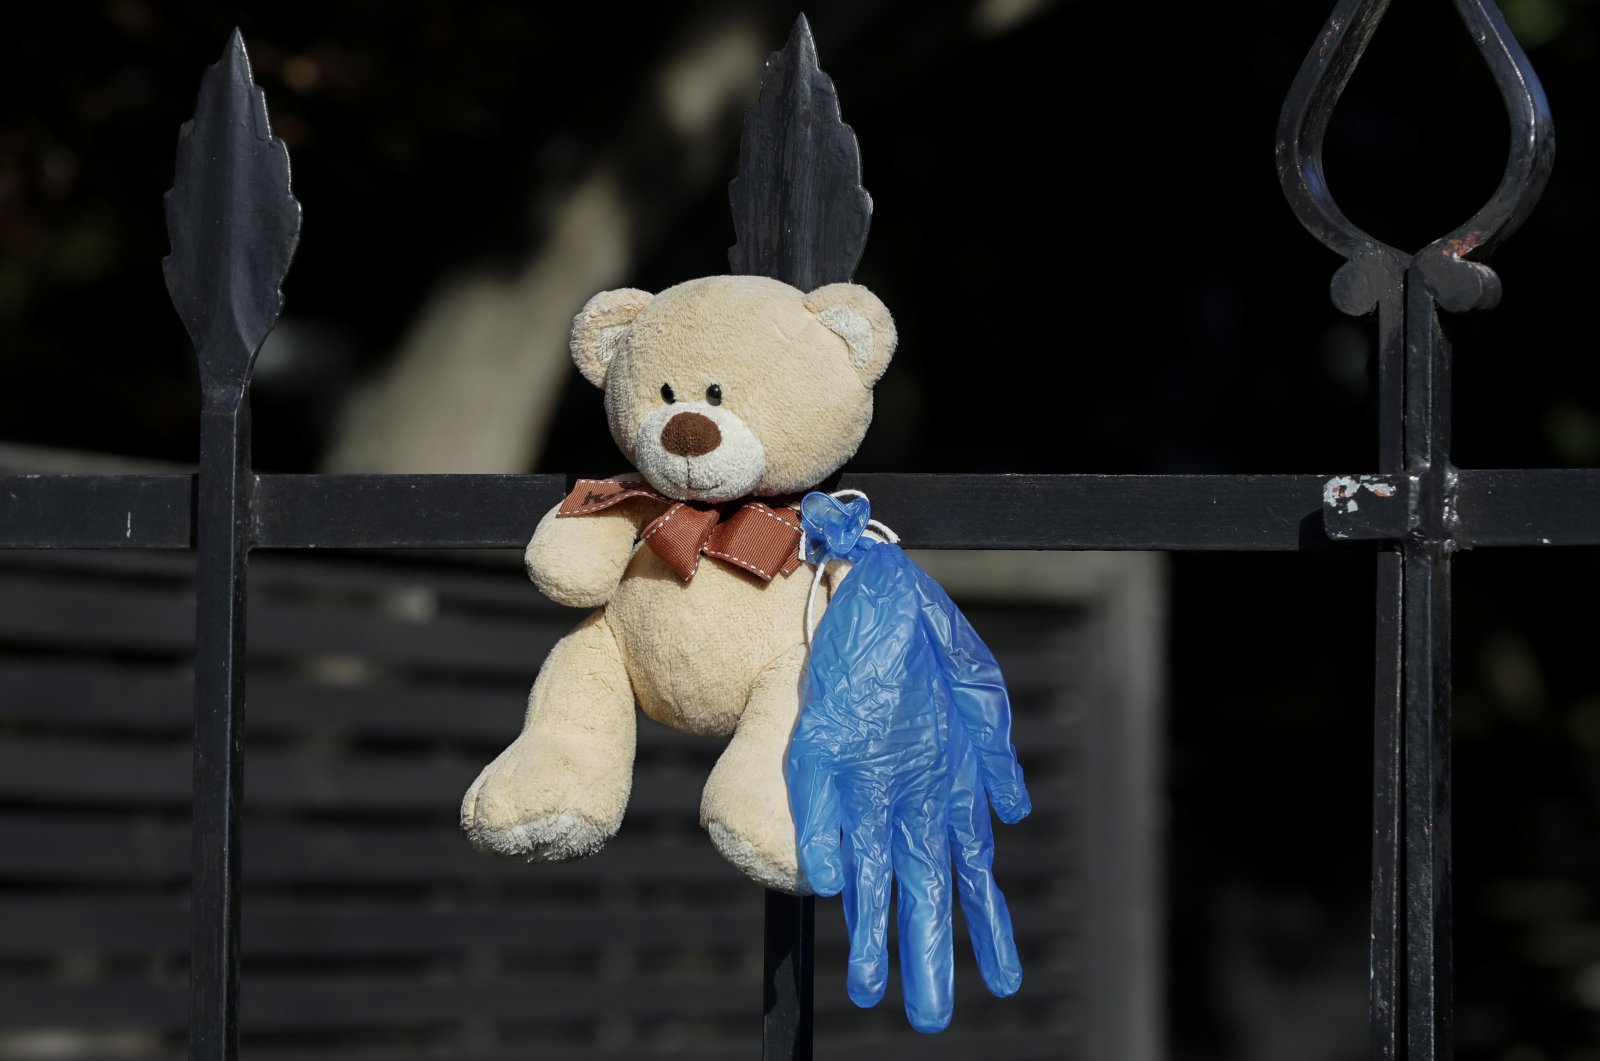 A teddy bear hangs on a fence outside a house in Christchurch, New Zealand, on Tuesday, March 31, 2020. (AP Photo)